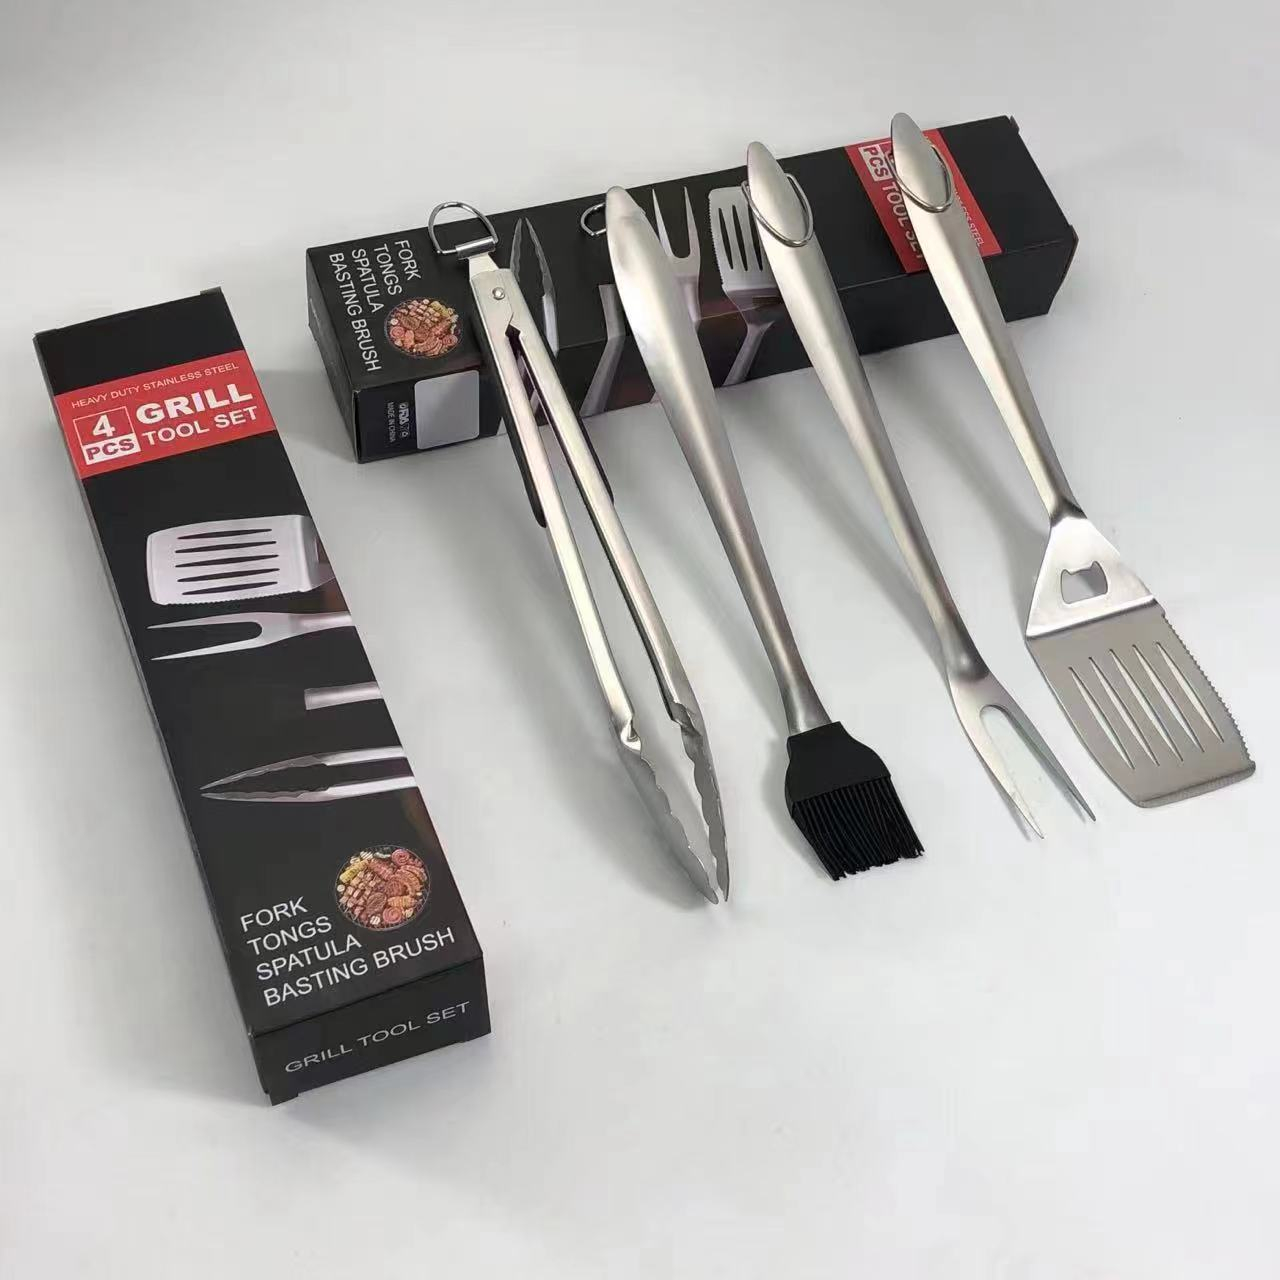 Grilling Tools BBQ Set - Grill Accessories w/ BBQ Tongs, Spatula, Fork, Brush - Stainless Grill Kit Grilling Set - Gift Ideas BBQ Accessories, Gifts for Men